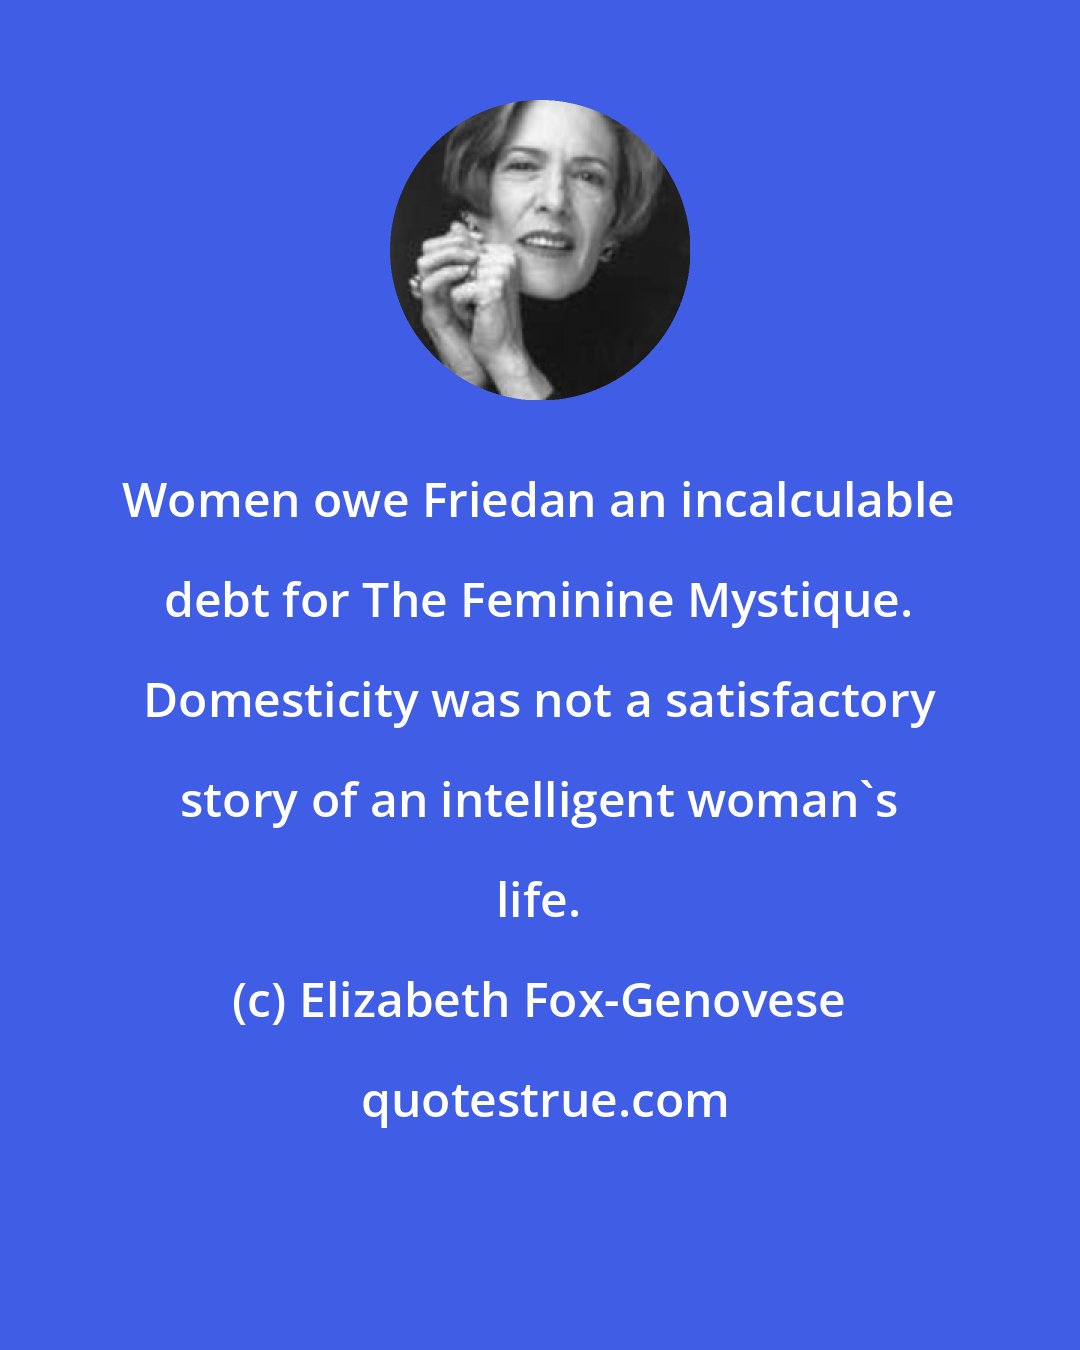 Elizabeth Fox-Genovese: Women owe Friedan an incalculable debt for The Feminine Mystique. Domesticity was not a satisfactory story of an intelligent woman's life.